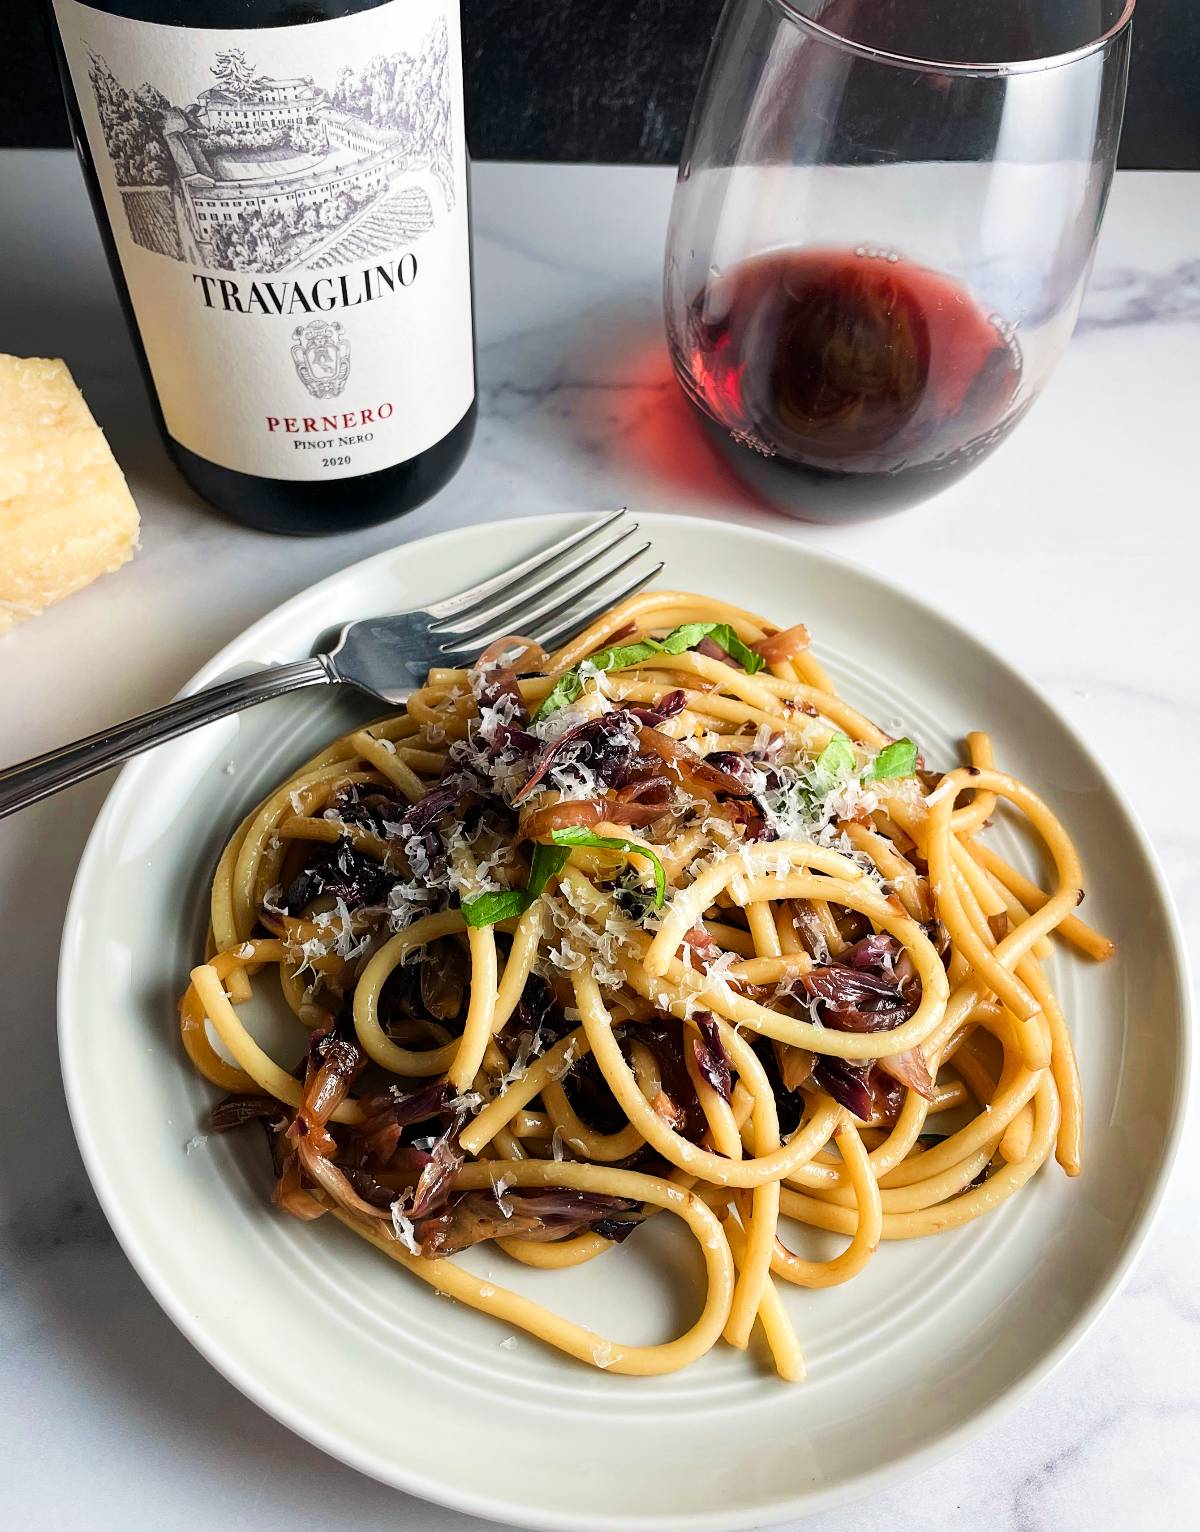 plate with bucatini pasta tossed with sautéed radicchio. Served with a red wine.